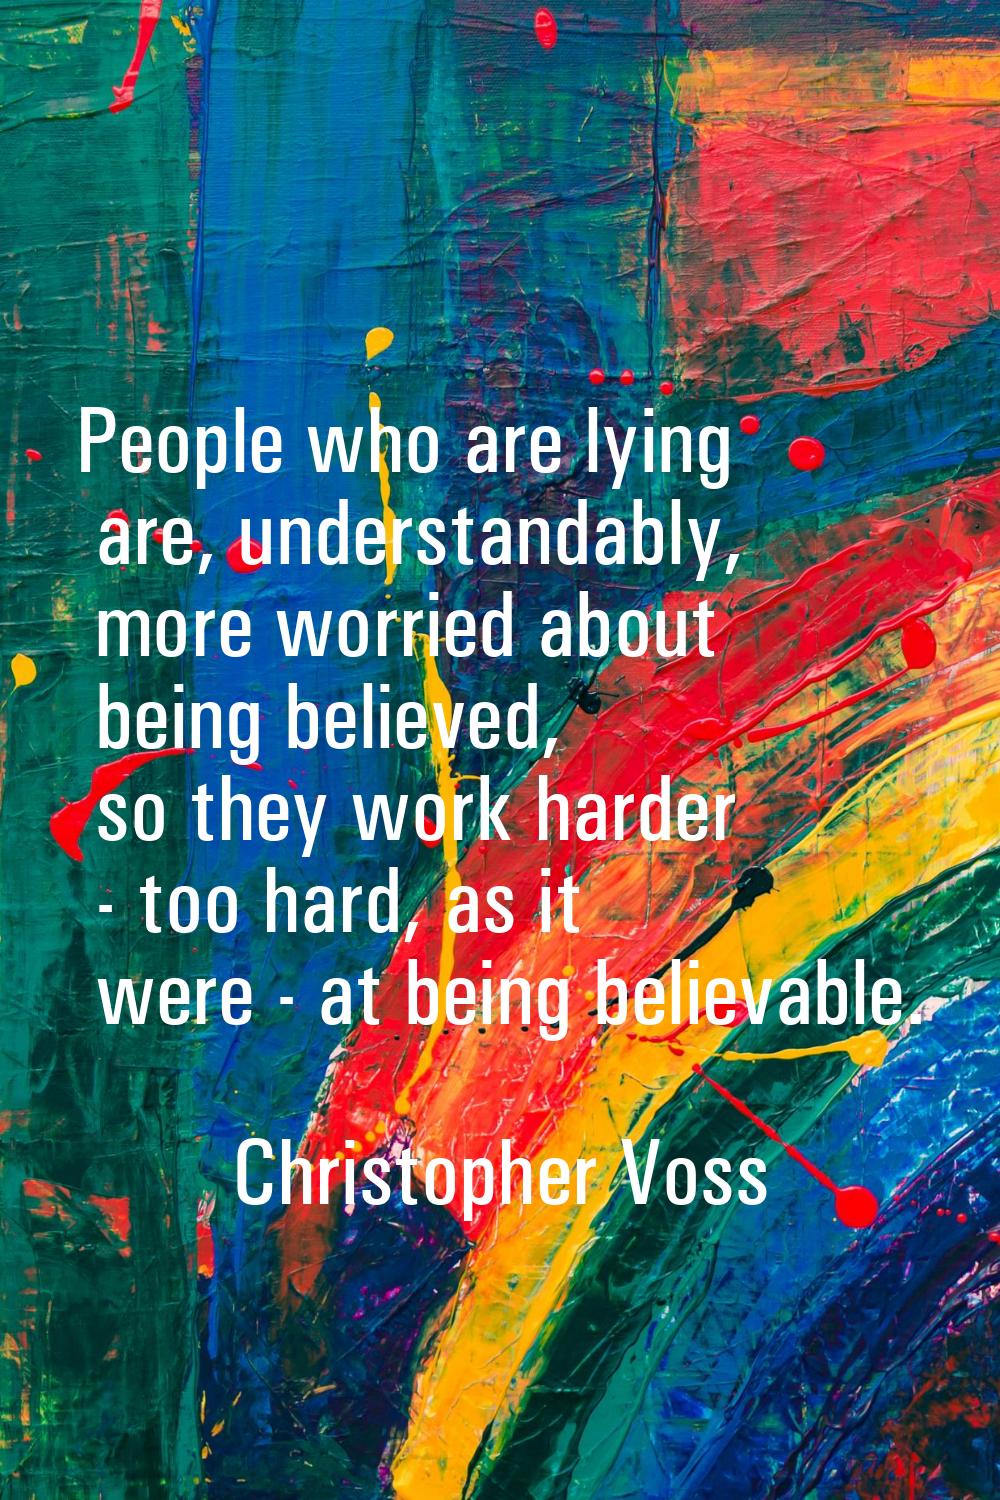 People who are lying are, understandably, more worried about being believed, so they work harder - 